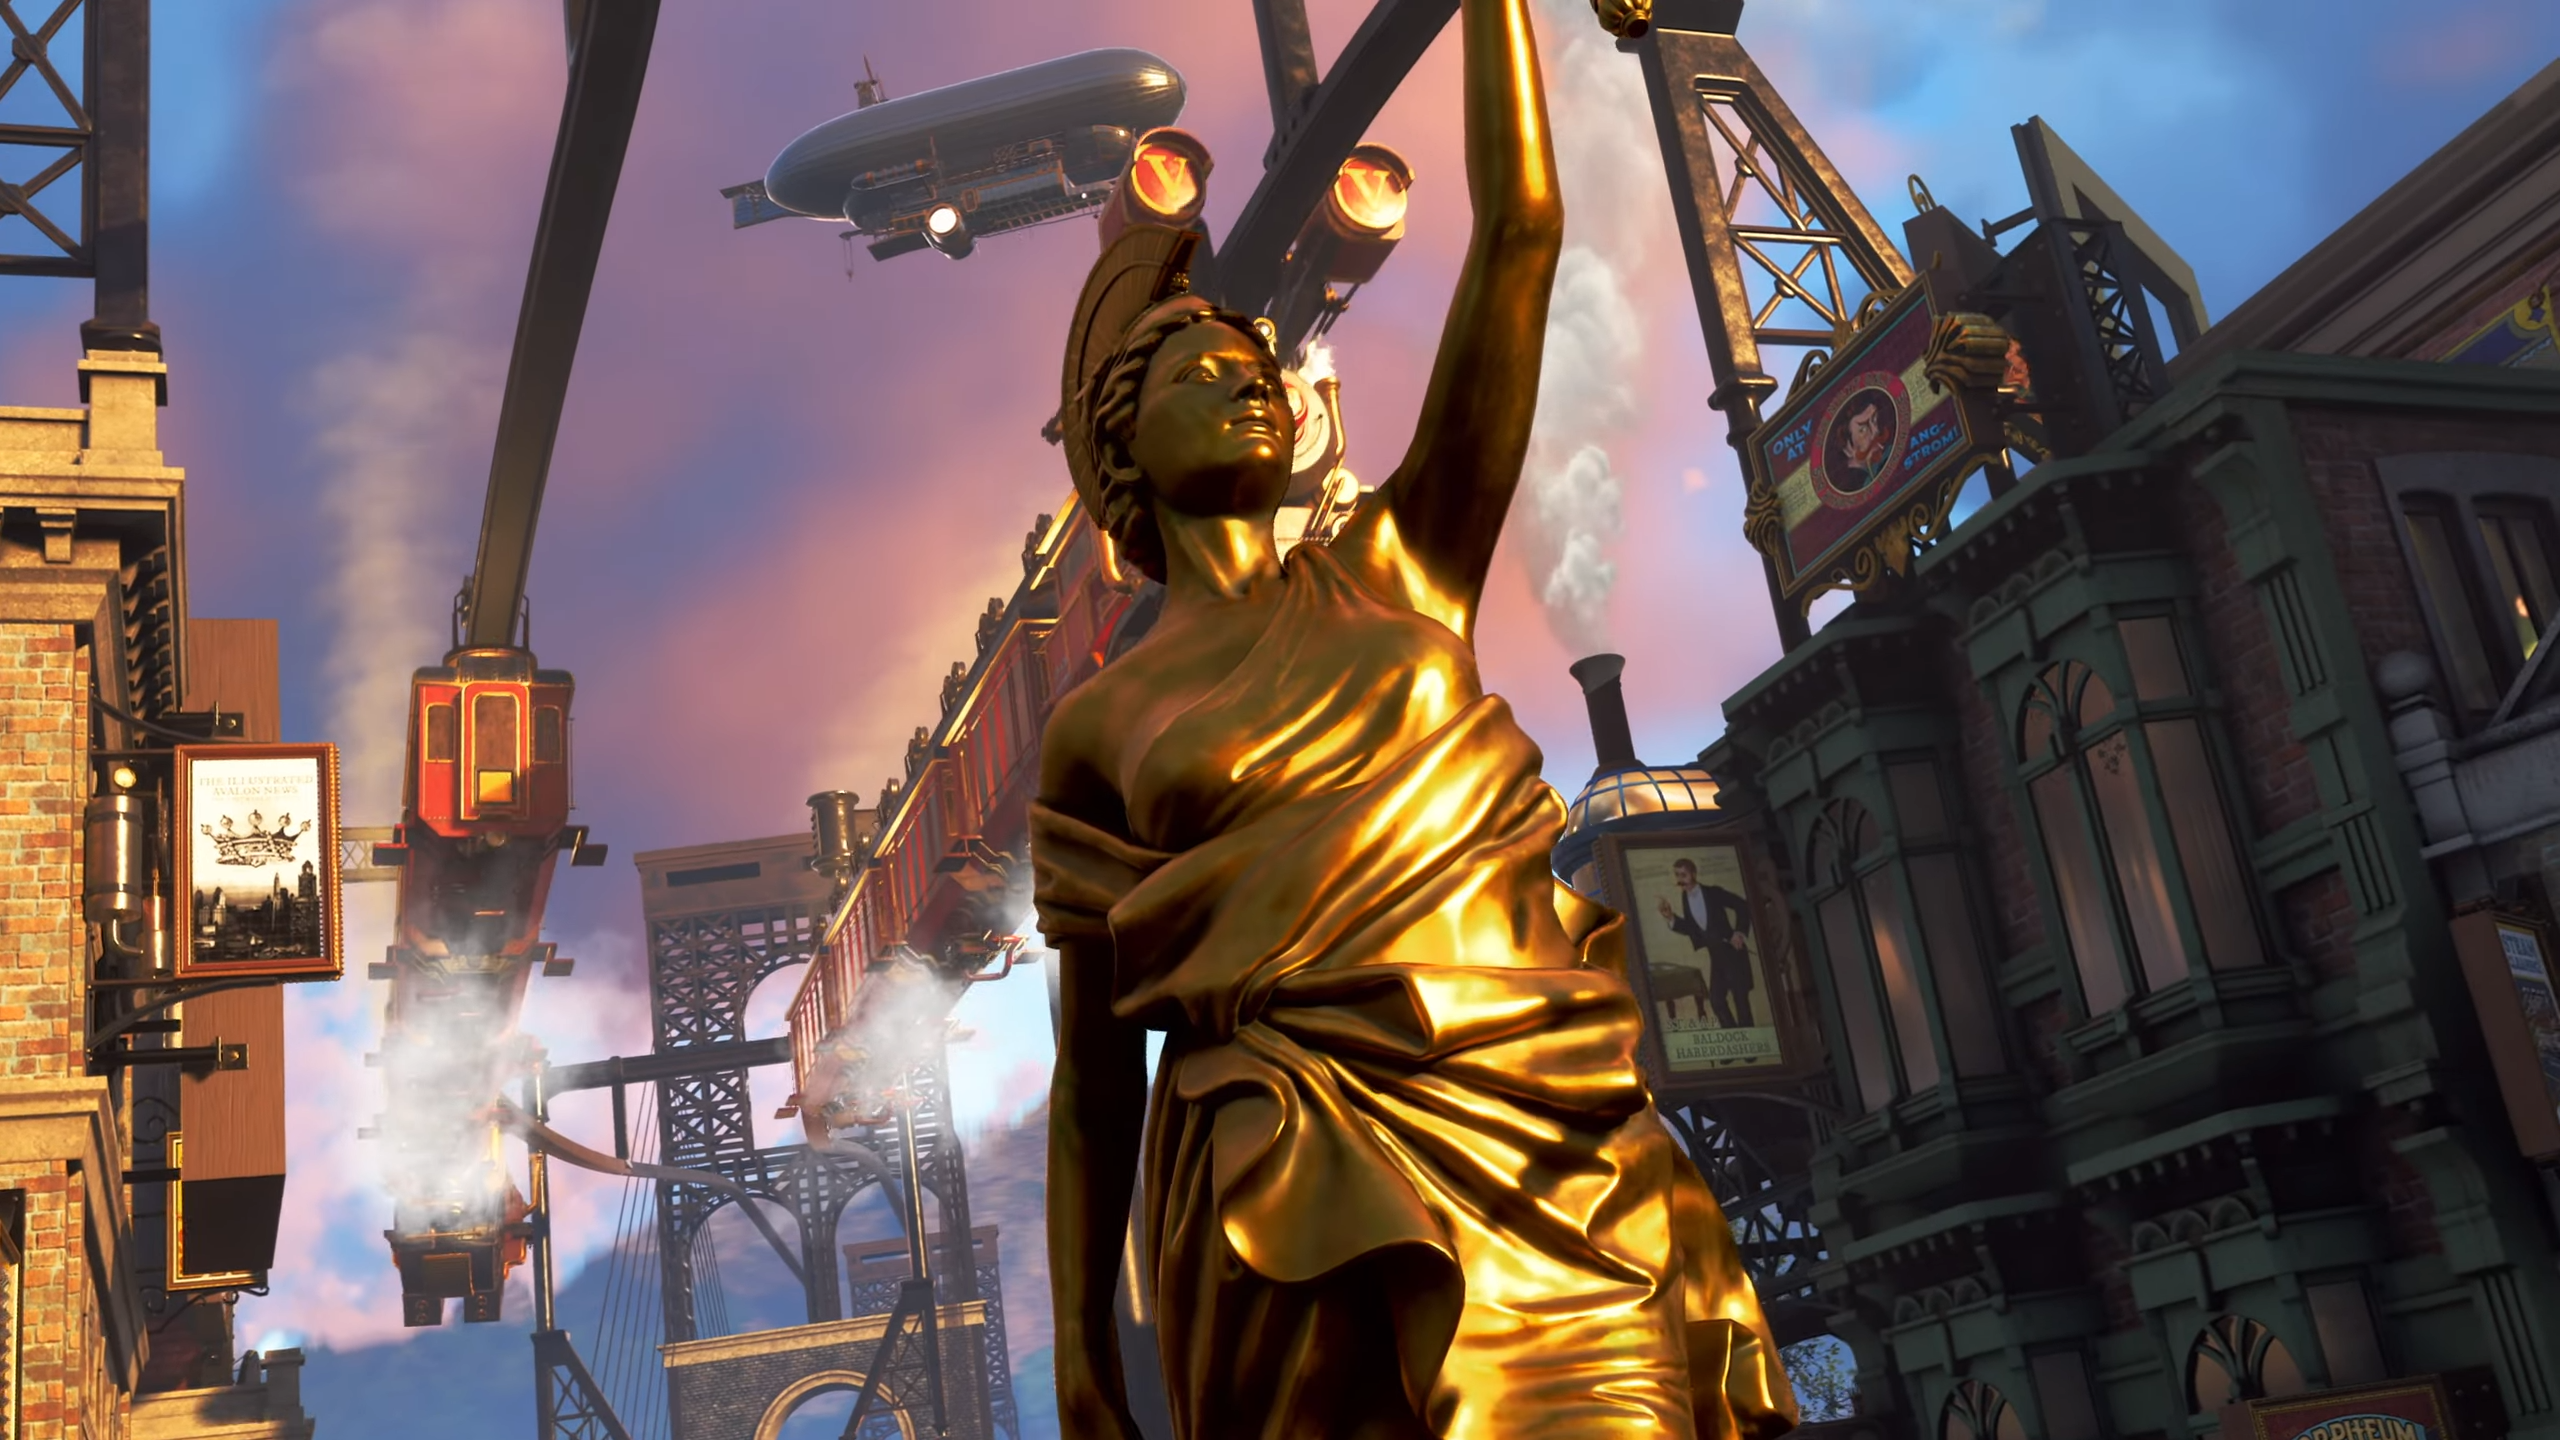 Bioshock Infinite DLC Could Feature New Companion Characters - The Escapist